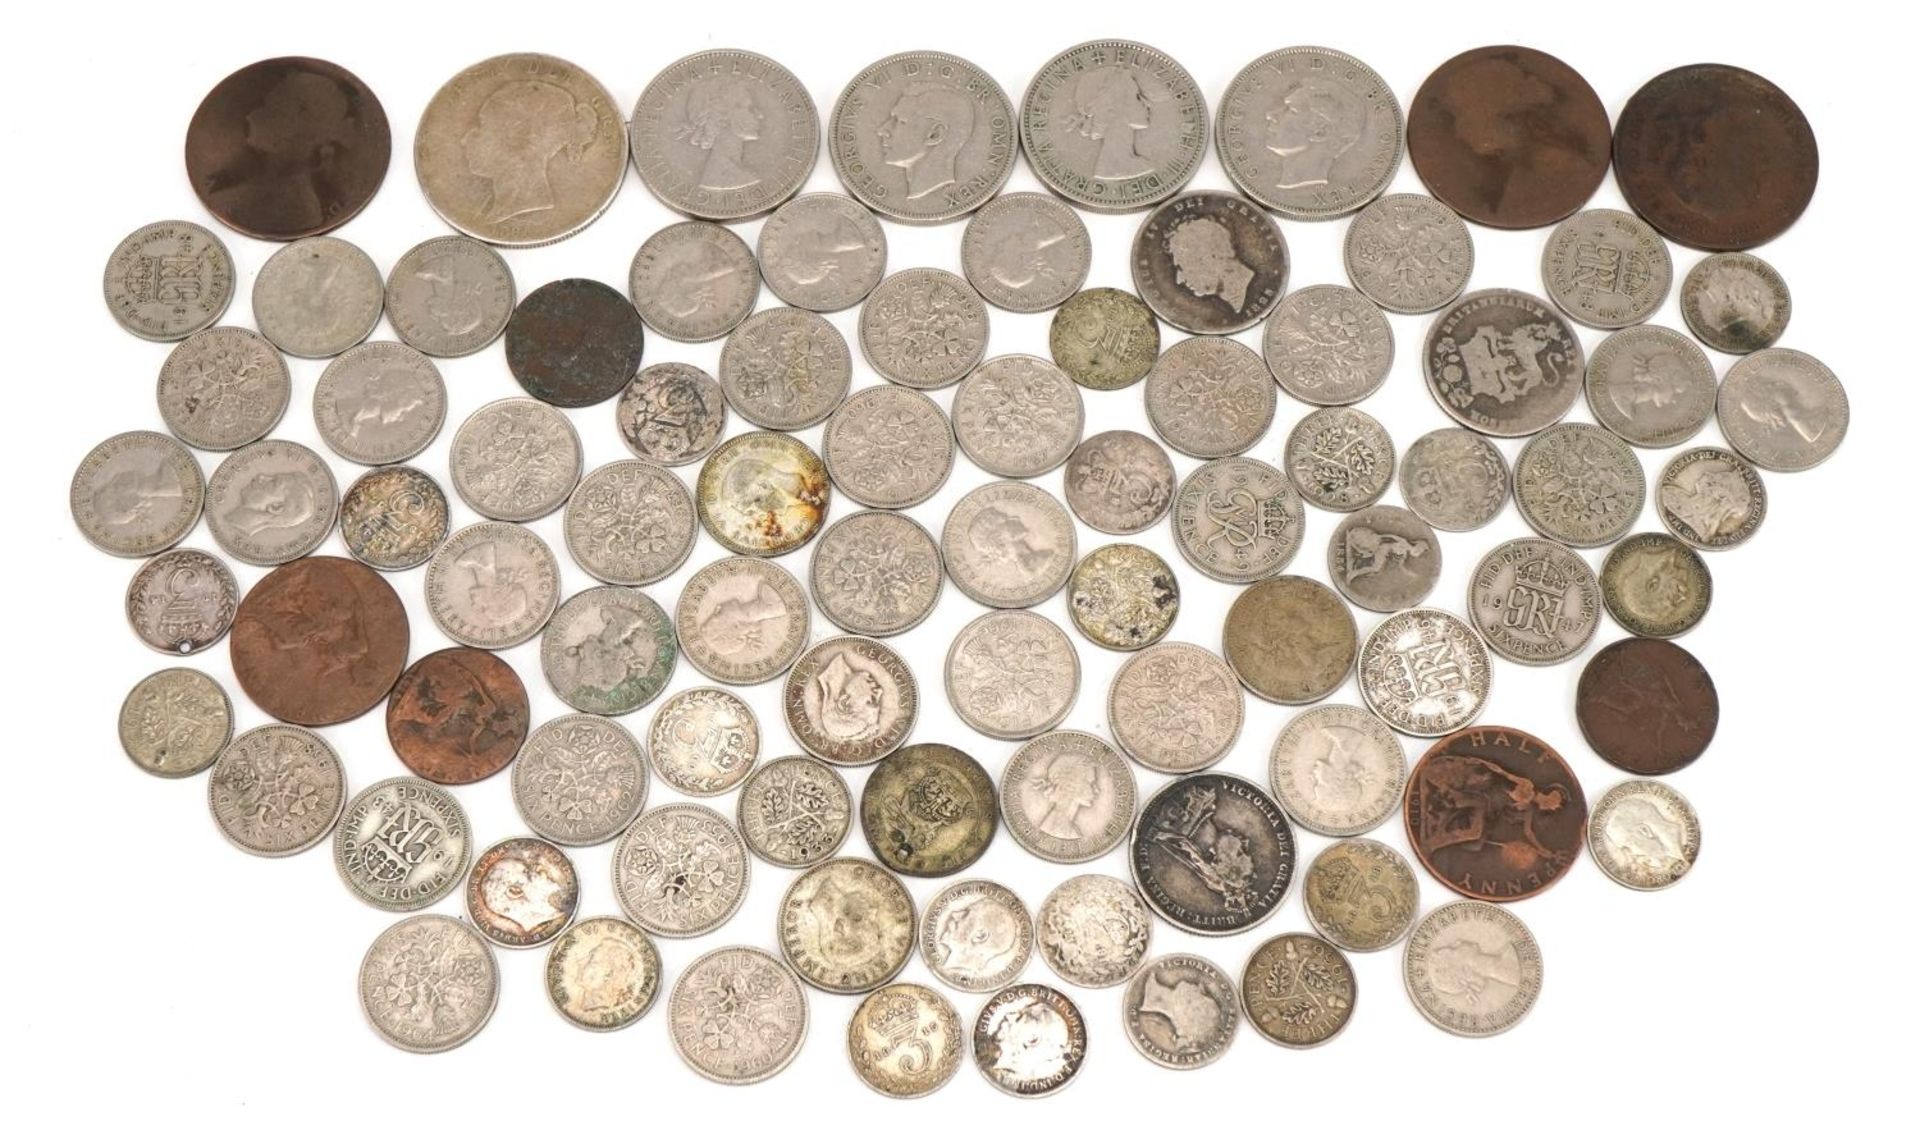 Victorian and later British coinage including half crowns and sixpences, 280.0g